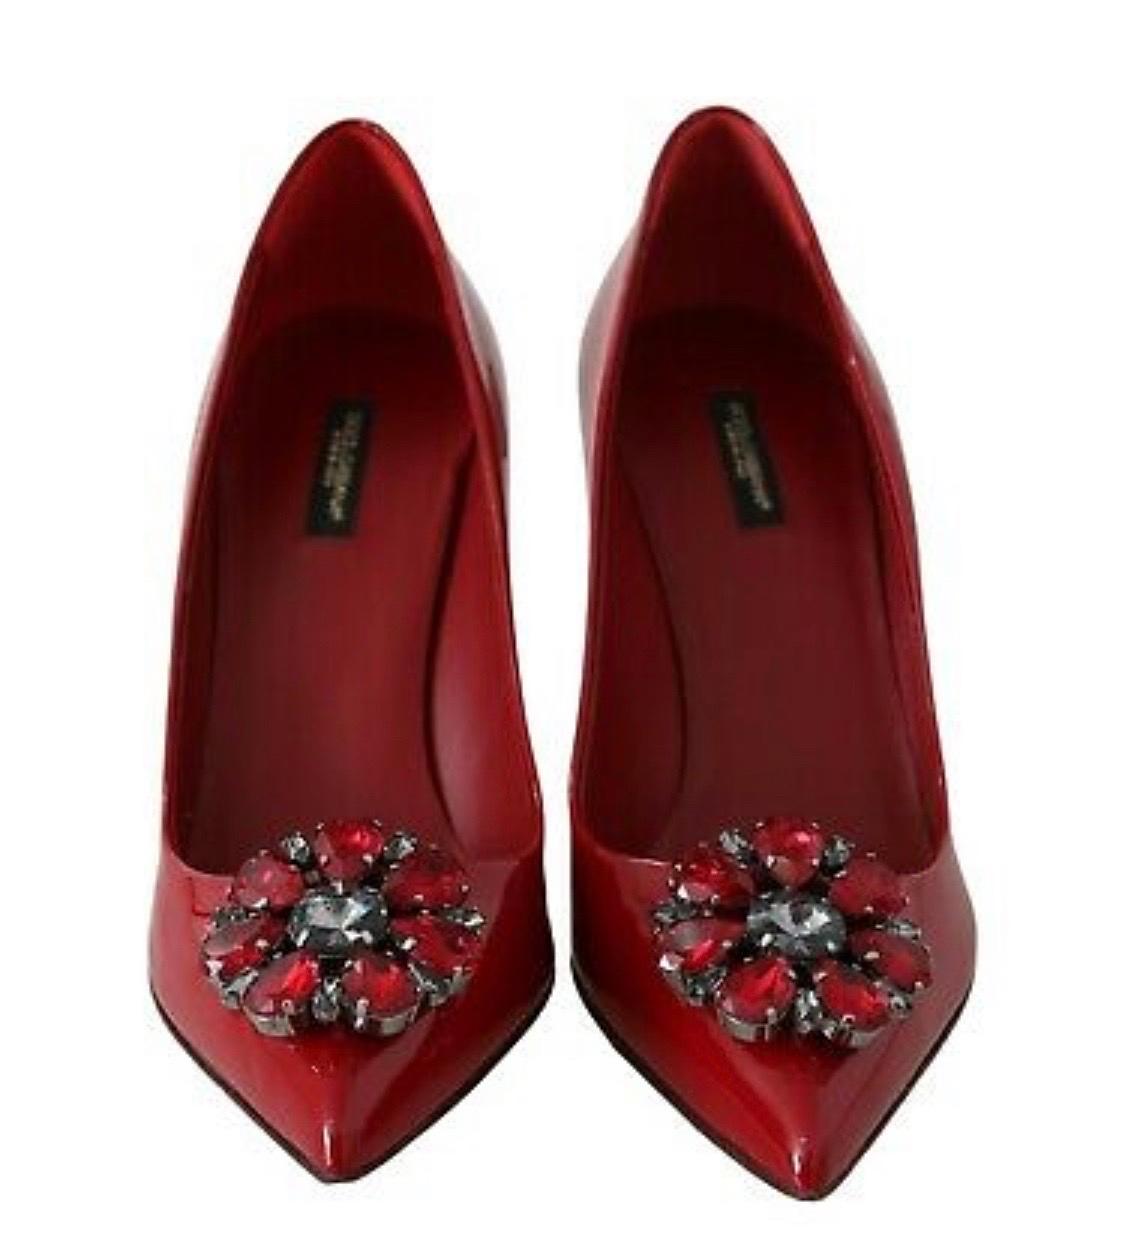 Dolce & Gabbana Shoes Red Leather Patent Pumps Heels EU39 3